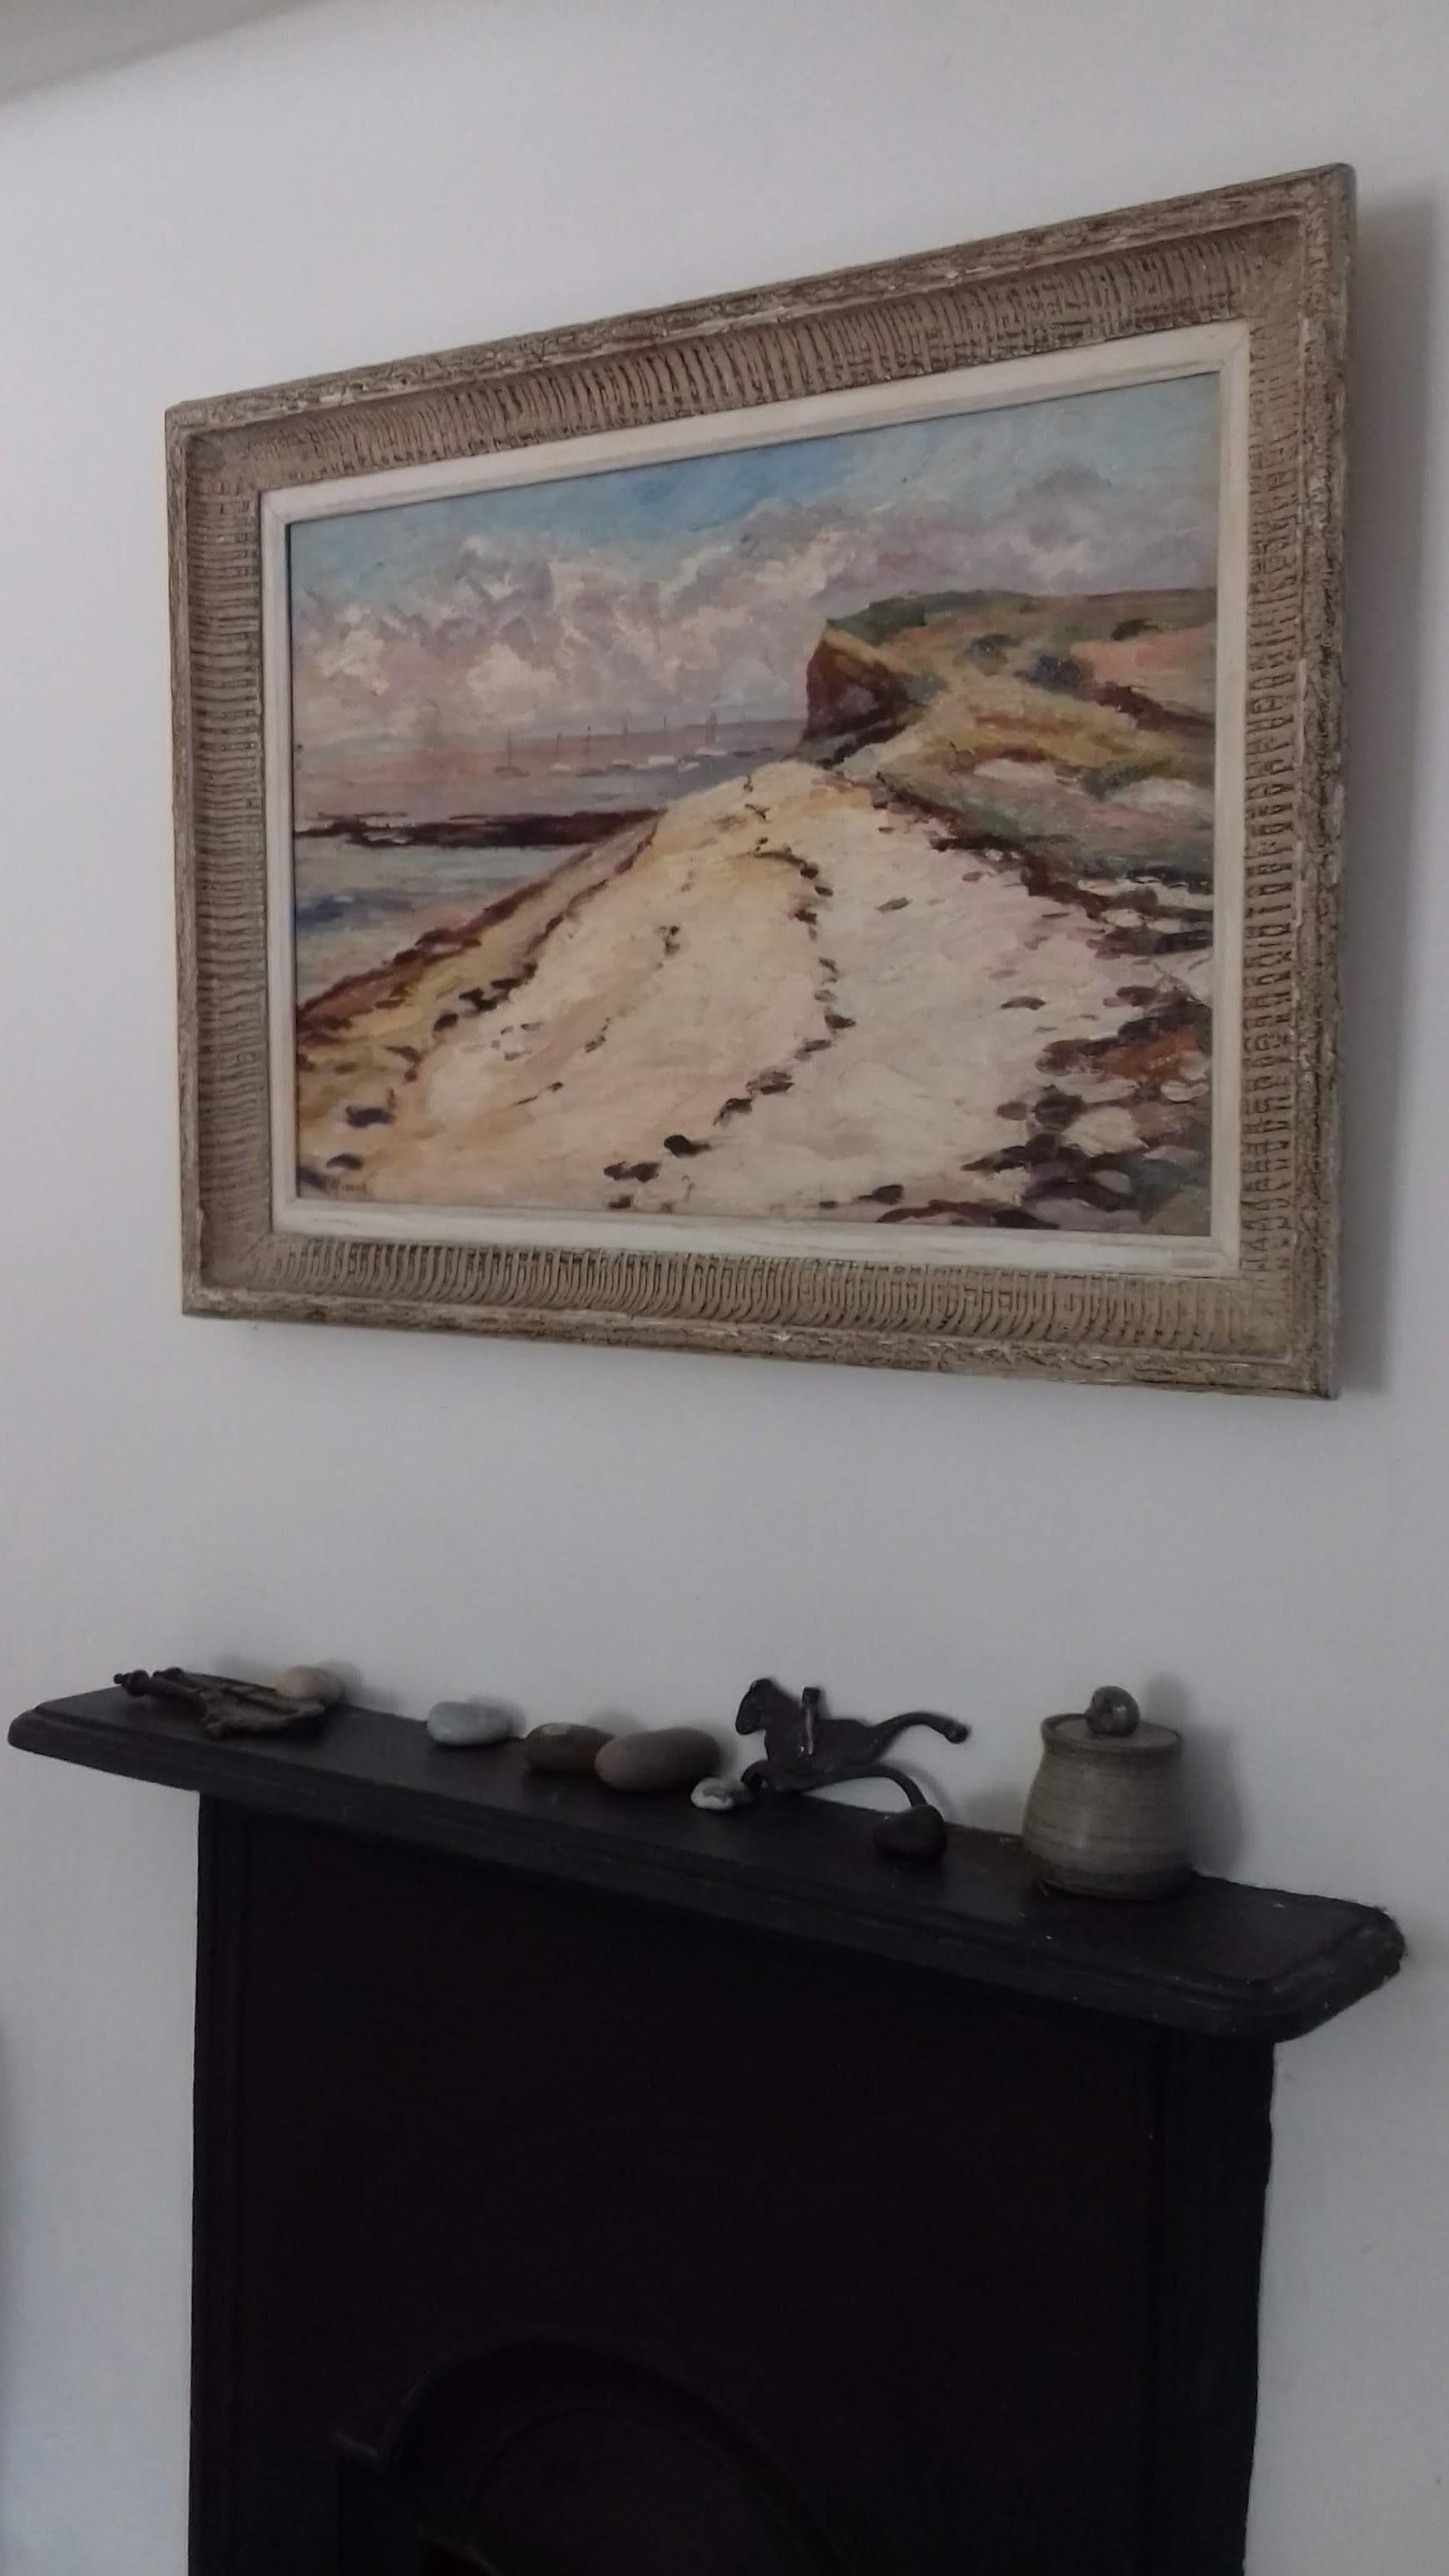 A beautiful post impressionist seascape by Louis Auguste Girard (1896-1981) . Painted in oil on paper and mounted on canvas, the painting is signed at the lower left , dated 1952 and situated Esnandes on the stretcher. Esnandes, in the